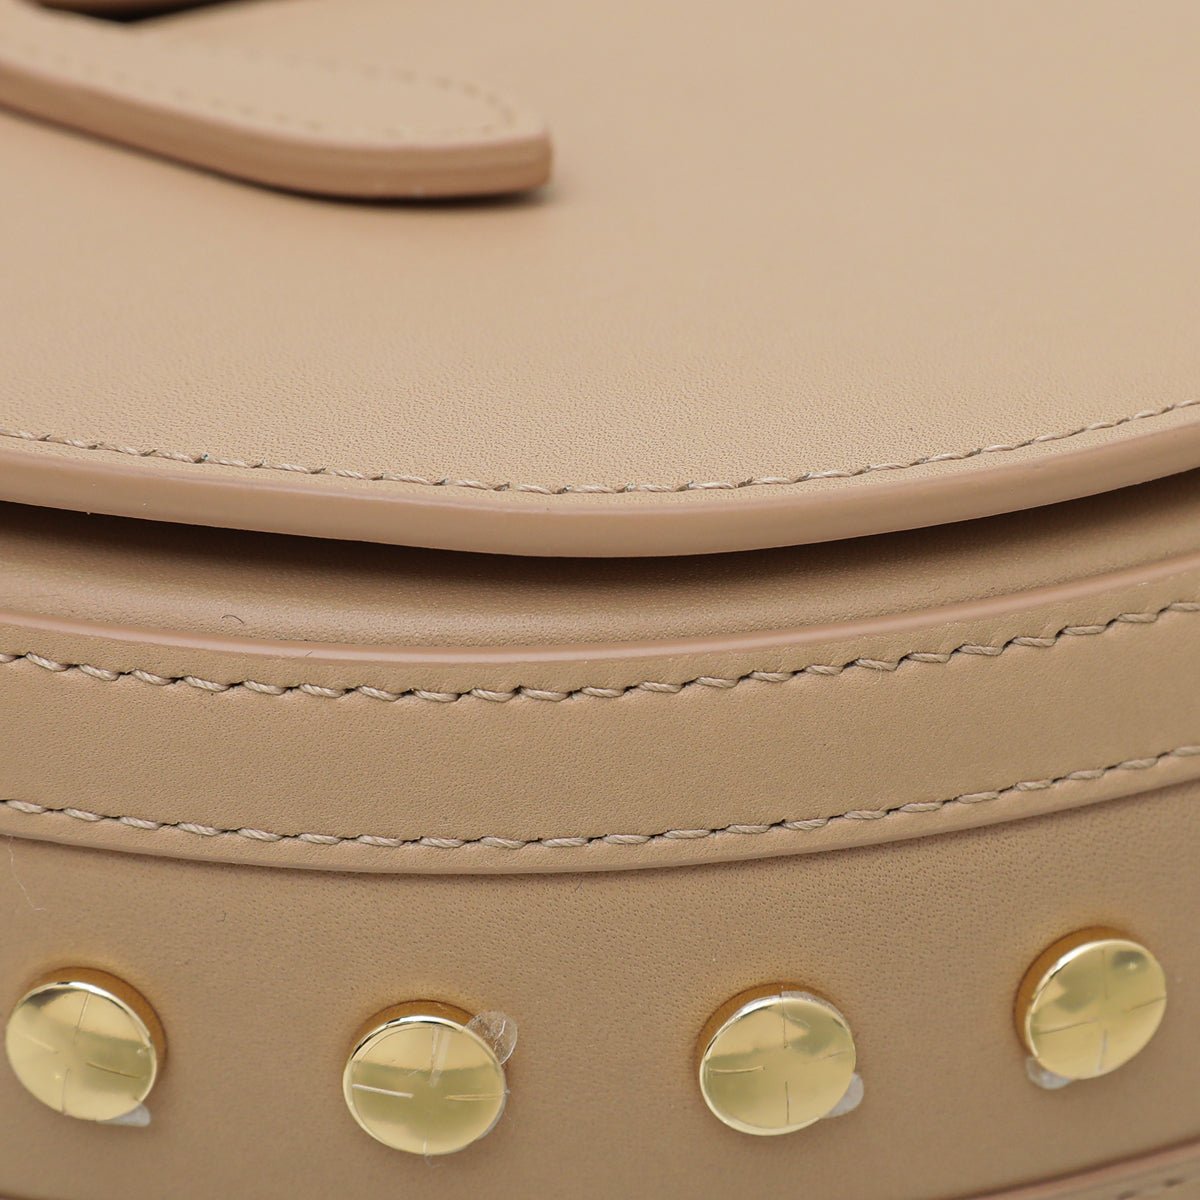 Burberry - Burberry Cool Beige Olympia Studs Flap Bag | The Closet